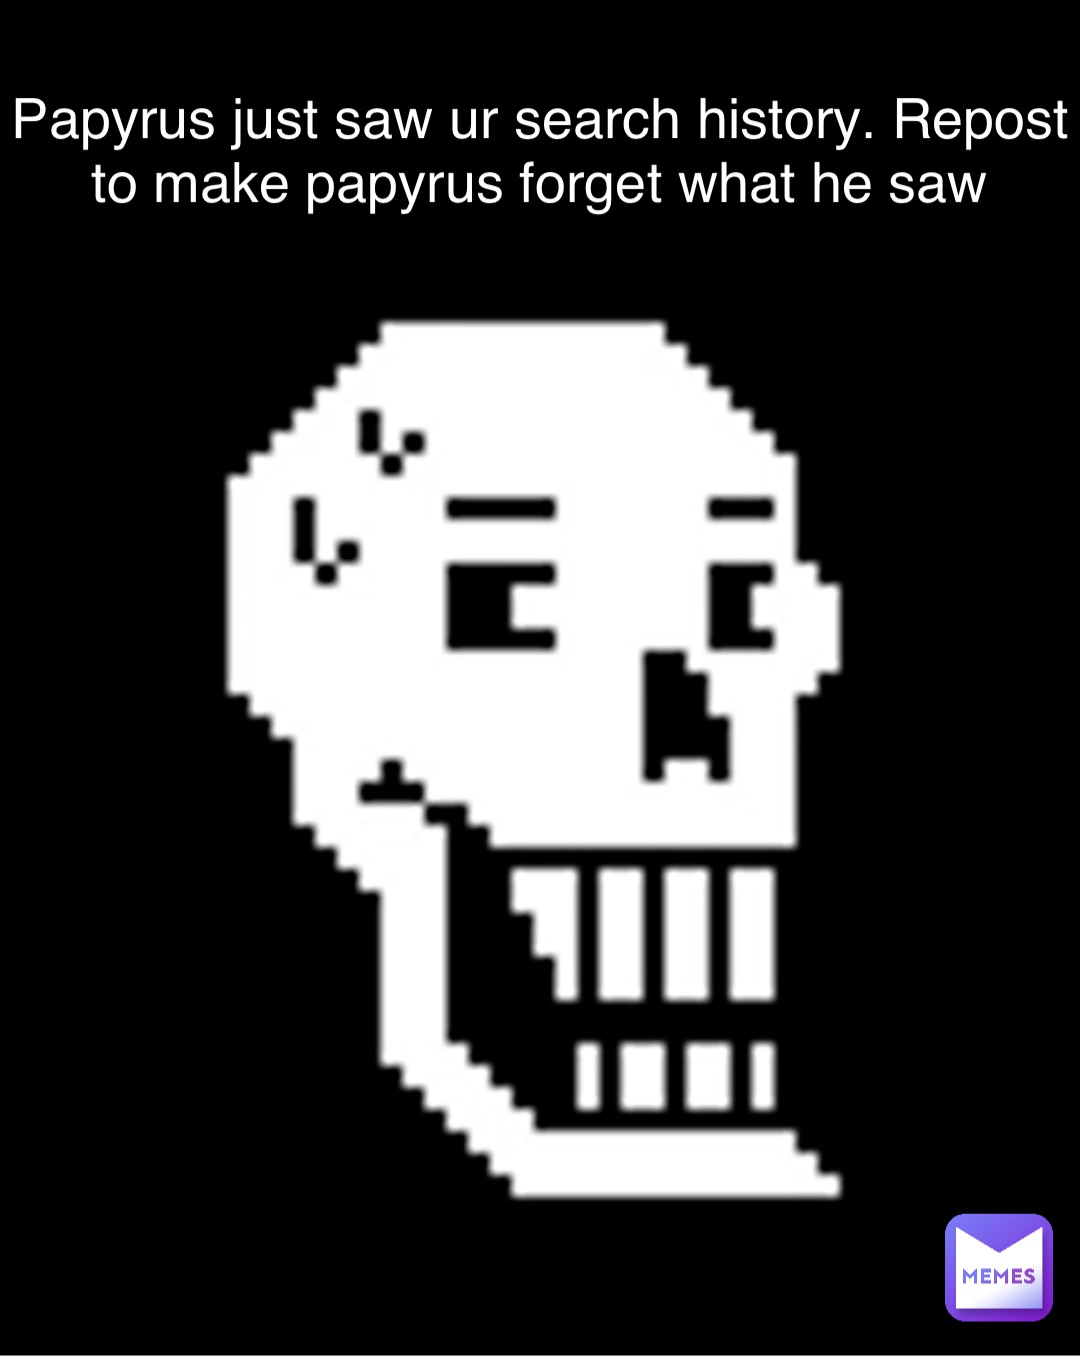 Double tap to edit Papyrus just saw ur search history. Repost to make papyrus forget what he saw